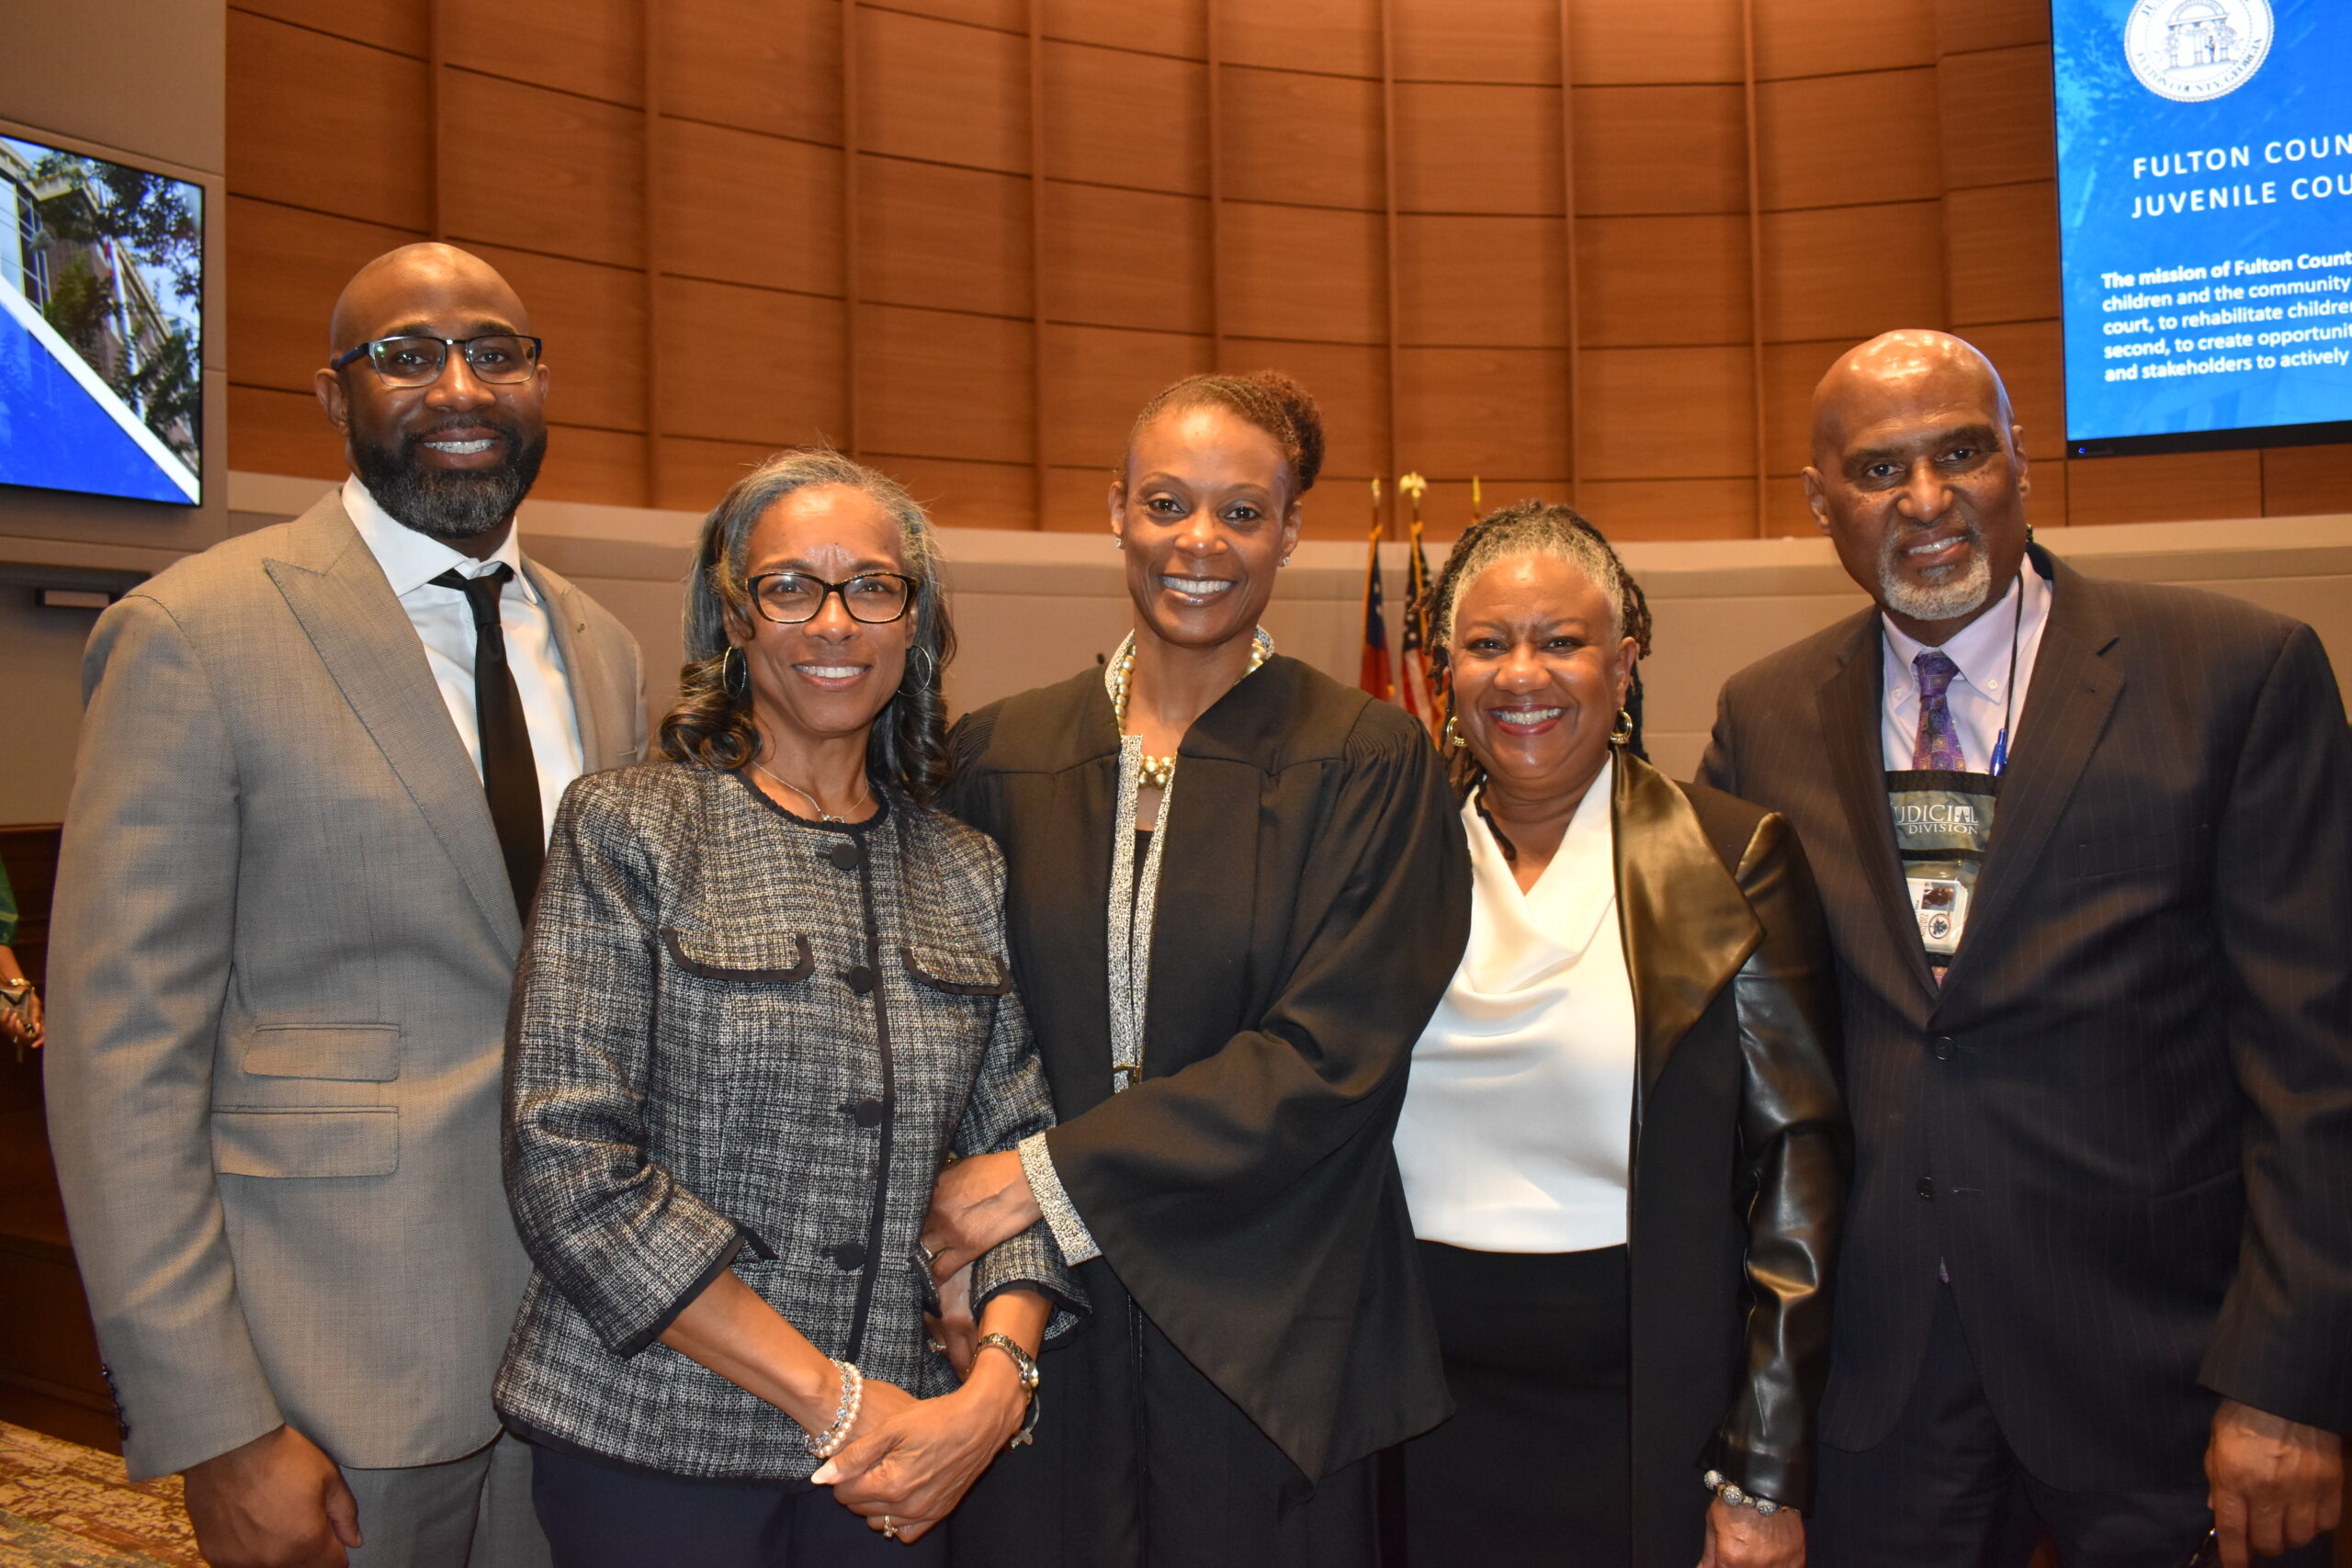 judge coud with judges scaled Fulton County Juvenile Court